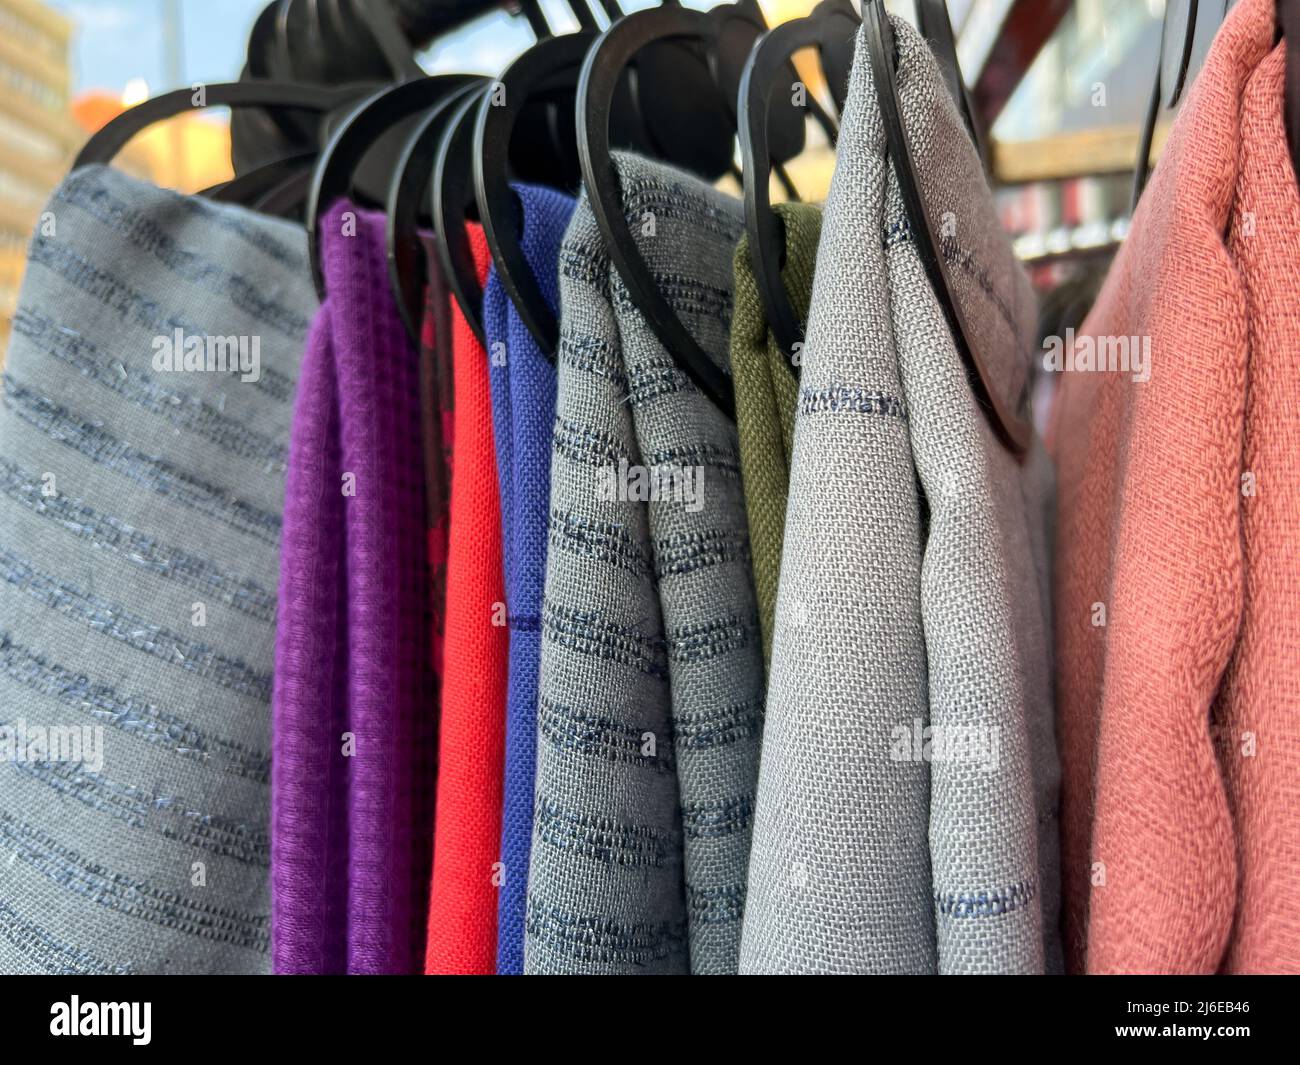 scarf, colorful trendy and fashionable scarves hanging on rack in a cloth store. fashion concept photo with selective focus Stock Photo